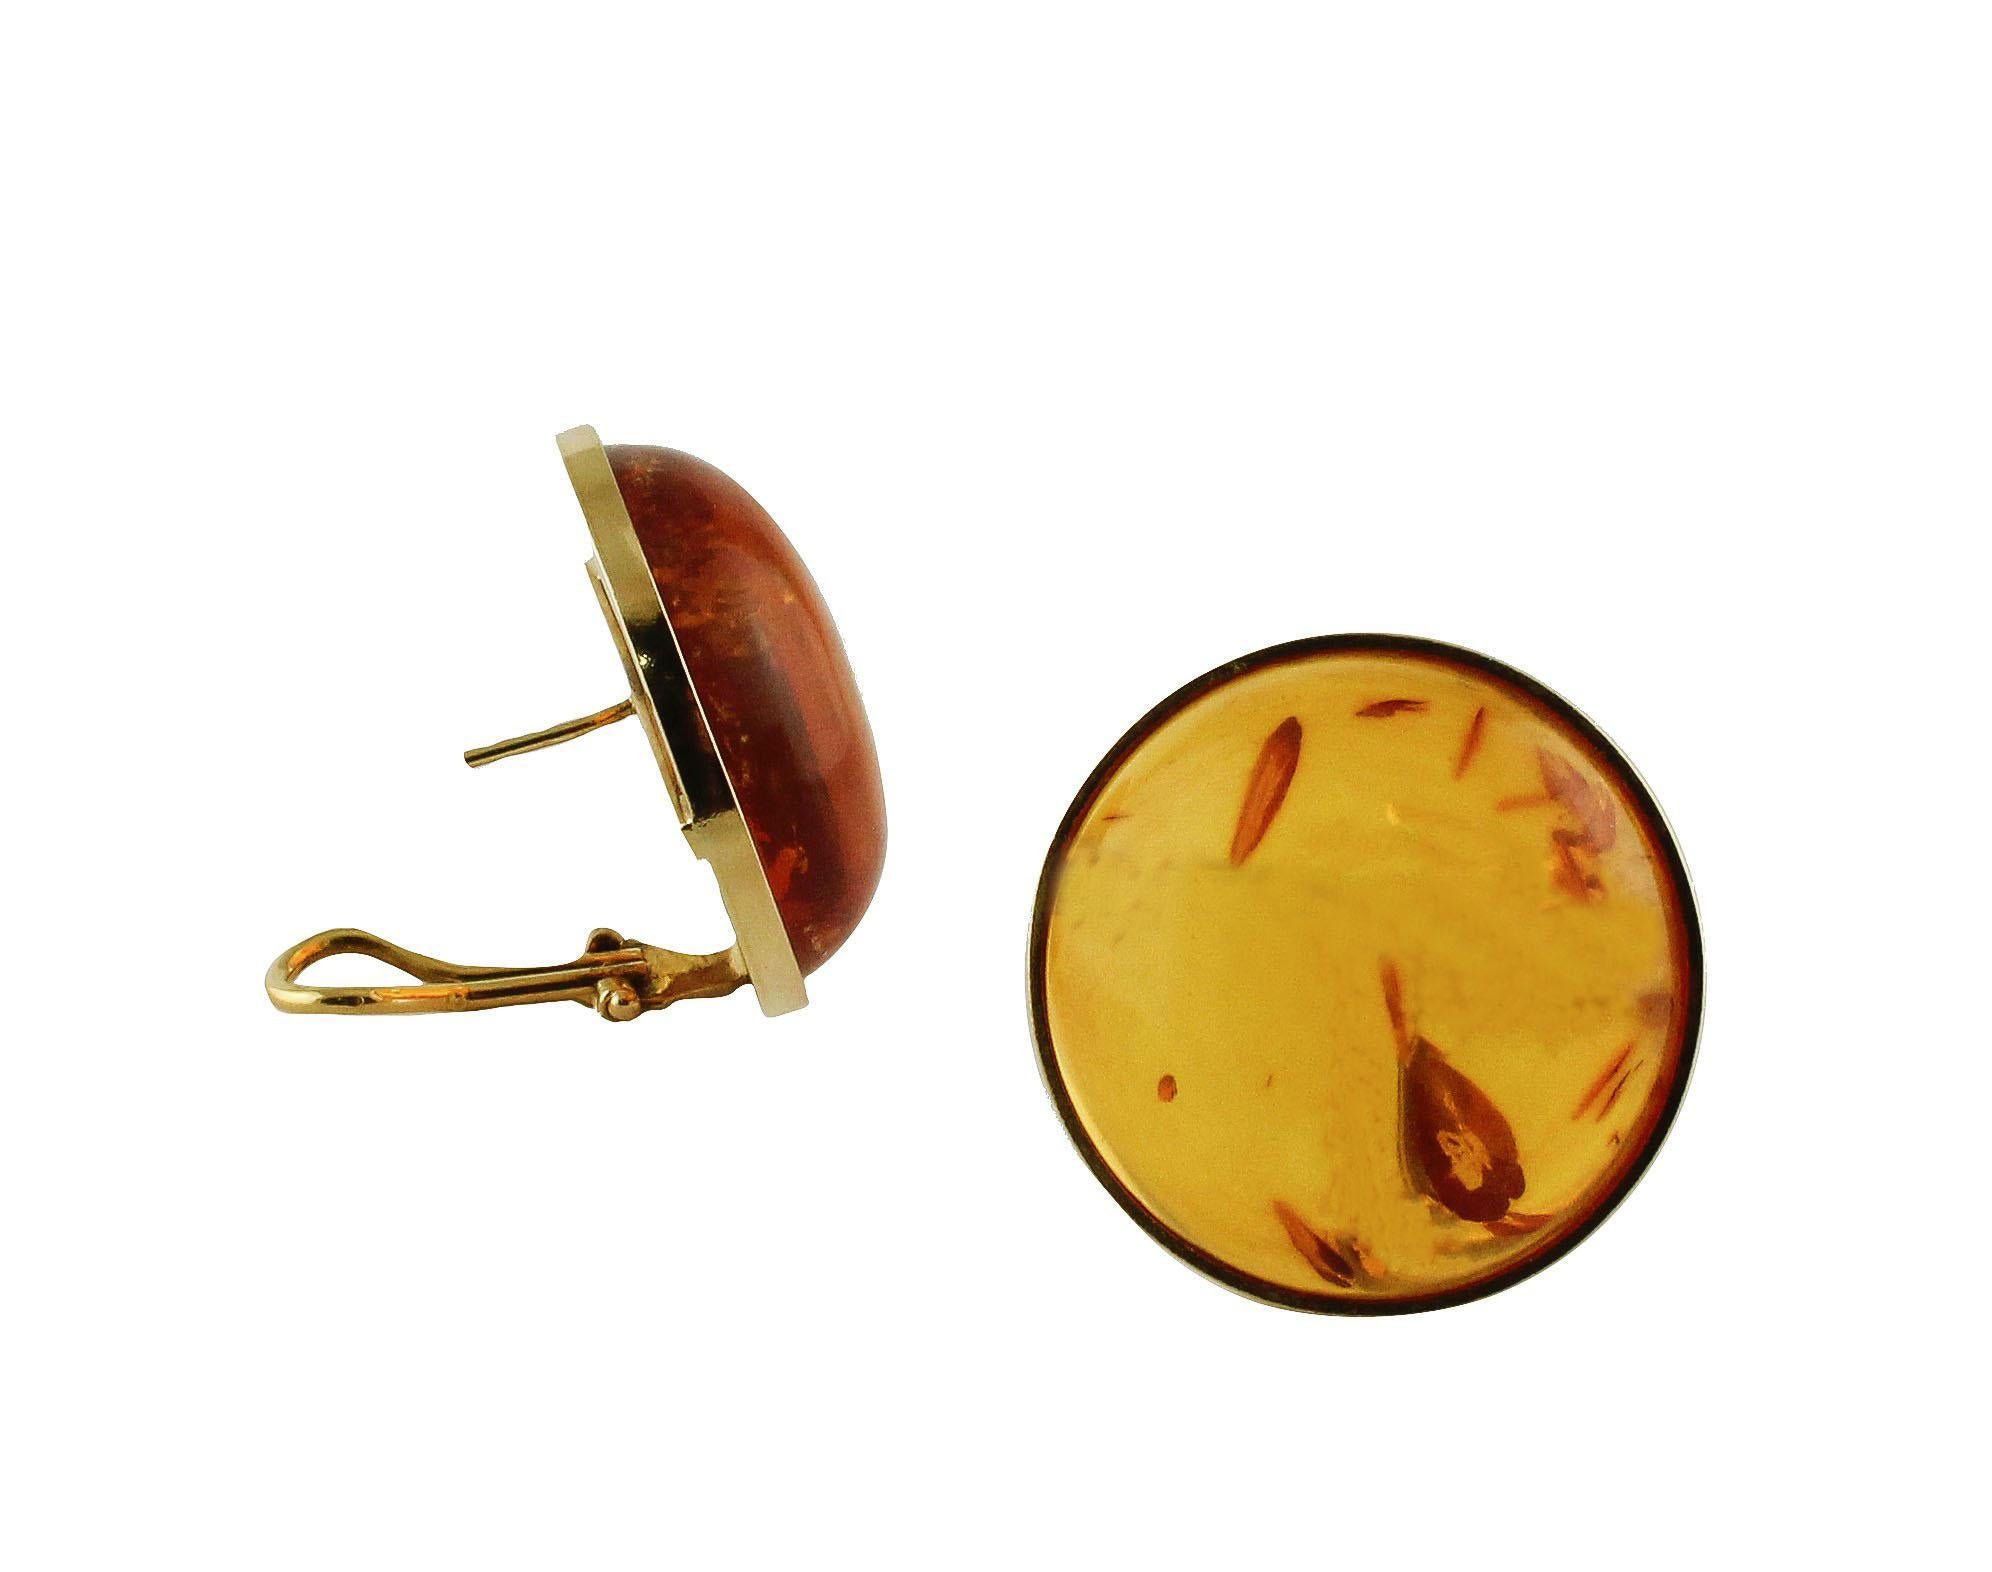 SHIPPING POLICY: 
No additional costs will be added to this order. 
Shipping costs will be totally covered by the seller (customs duties included).

Beautiful earrings in 18k yellow gold, with fabulous amber (2.7 diameter), with its natural